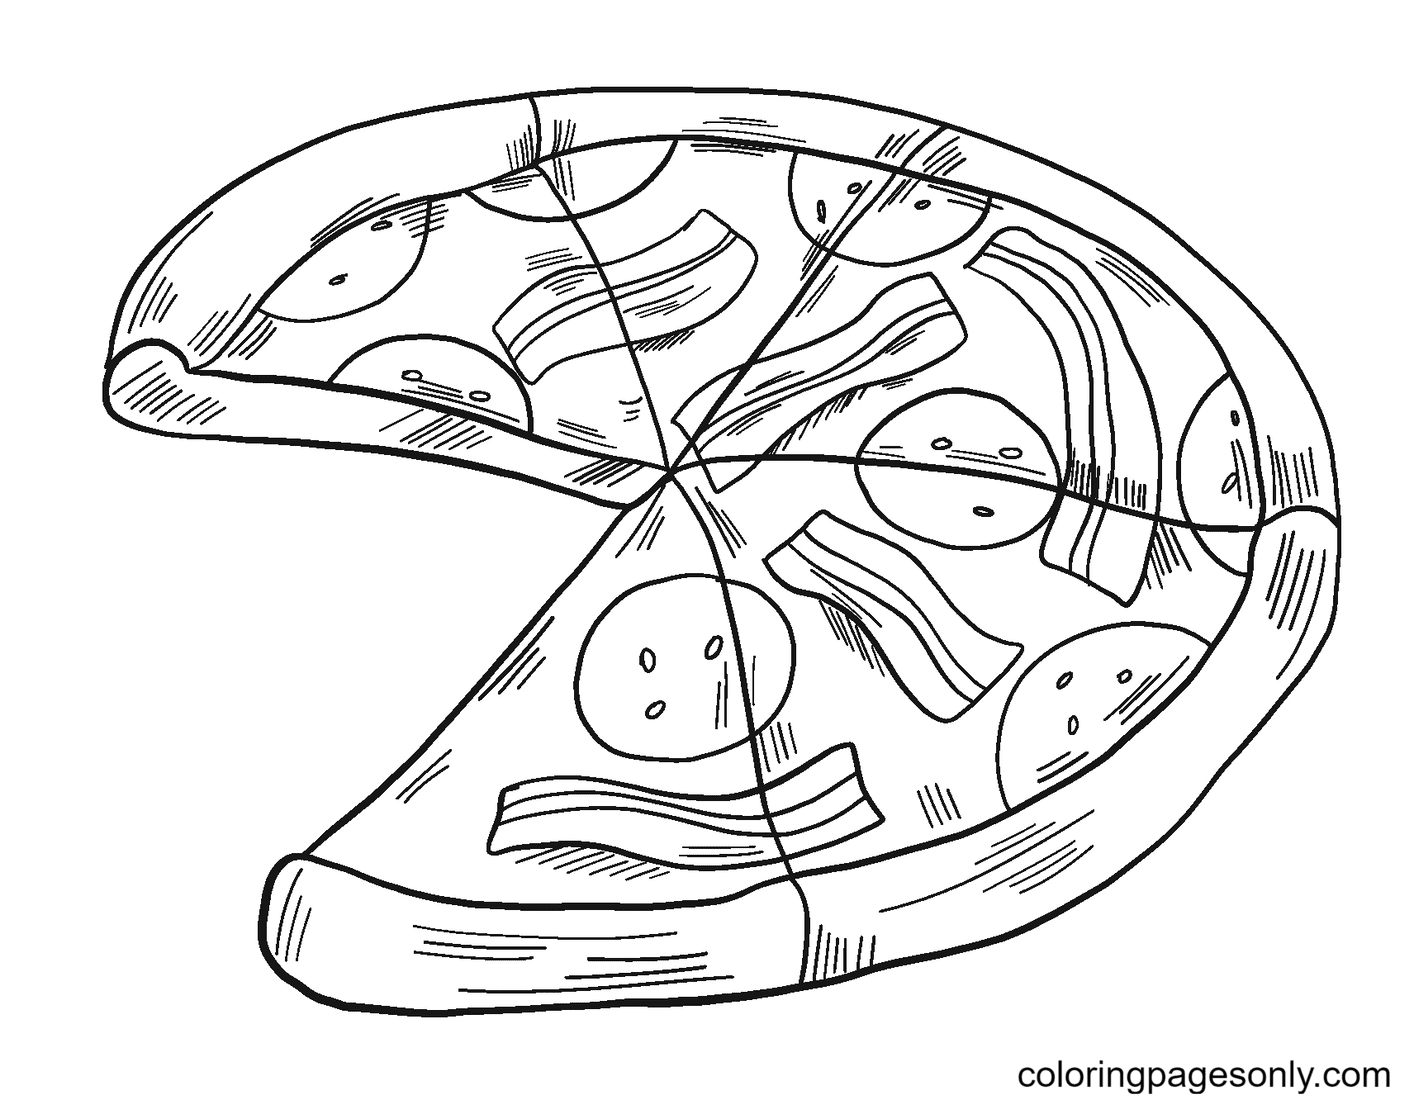 A Piece of Pizza is lost Coloring Page